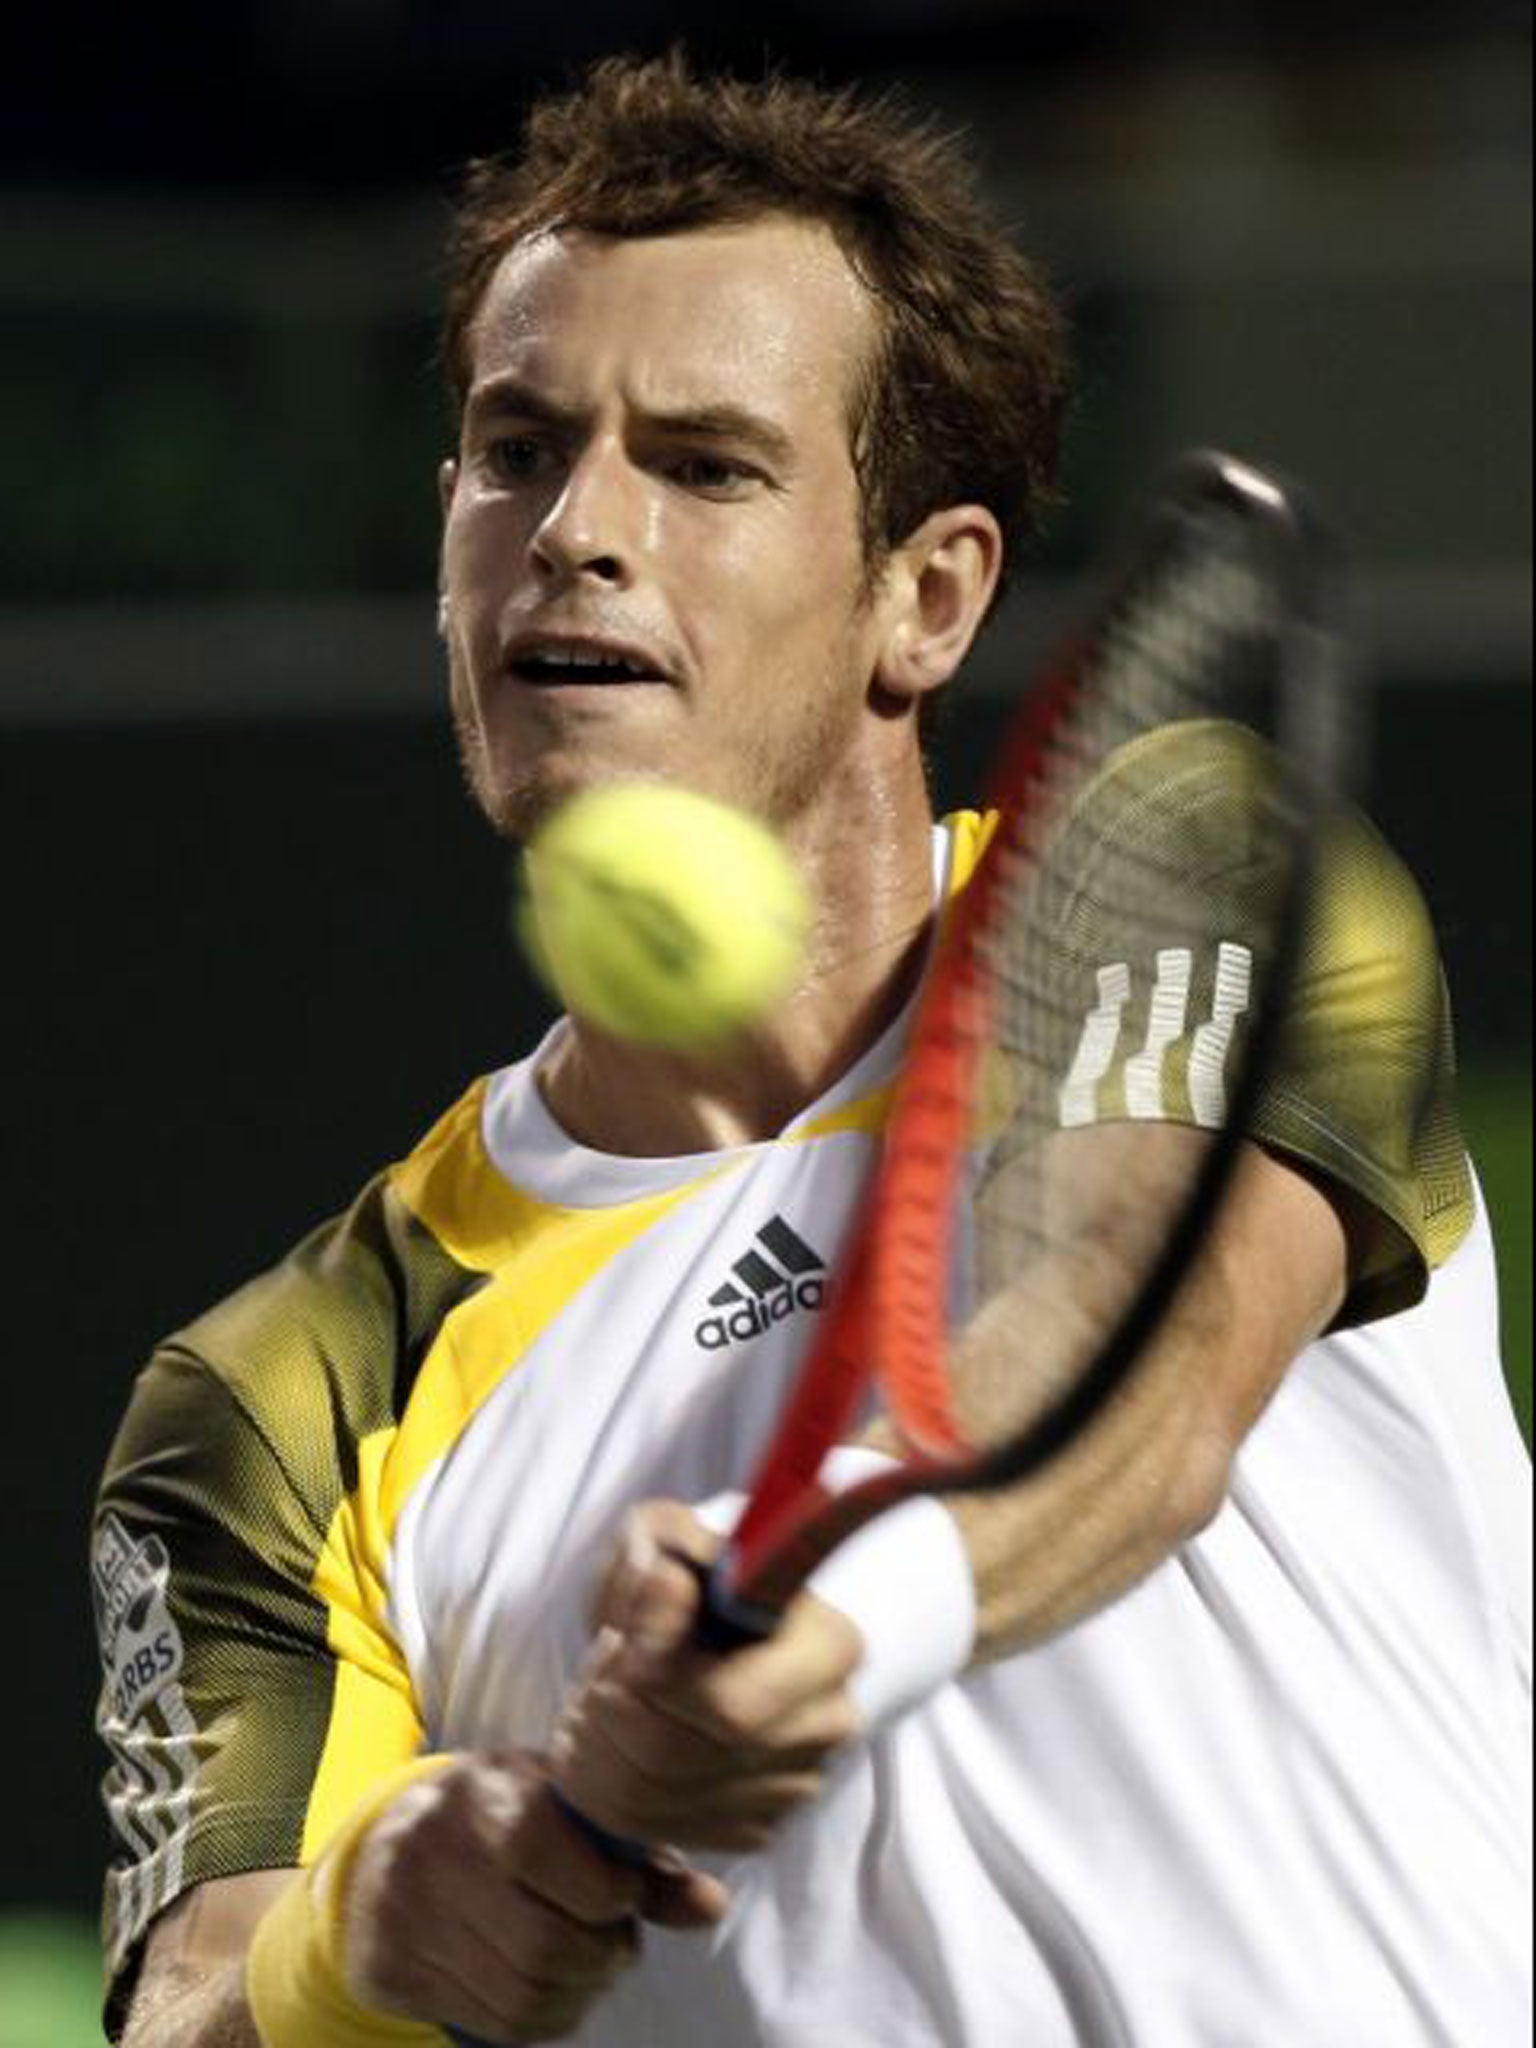 Eighth seed Gasquet started like a train before claiming the first set on a tie-break, but Murray asserted his authority in the second and third sets